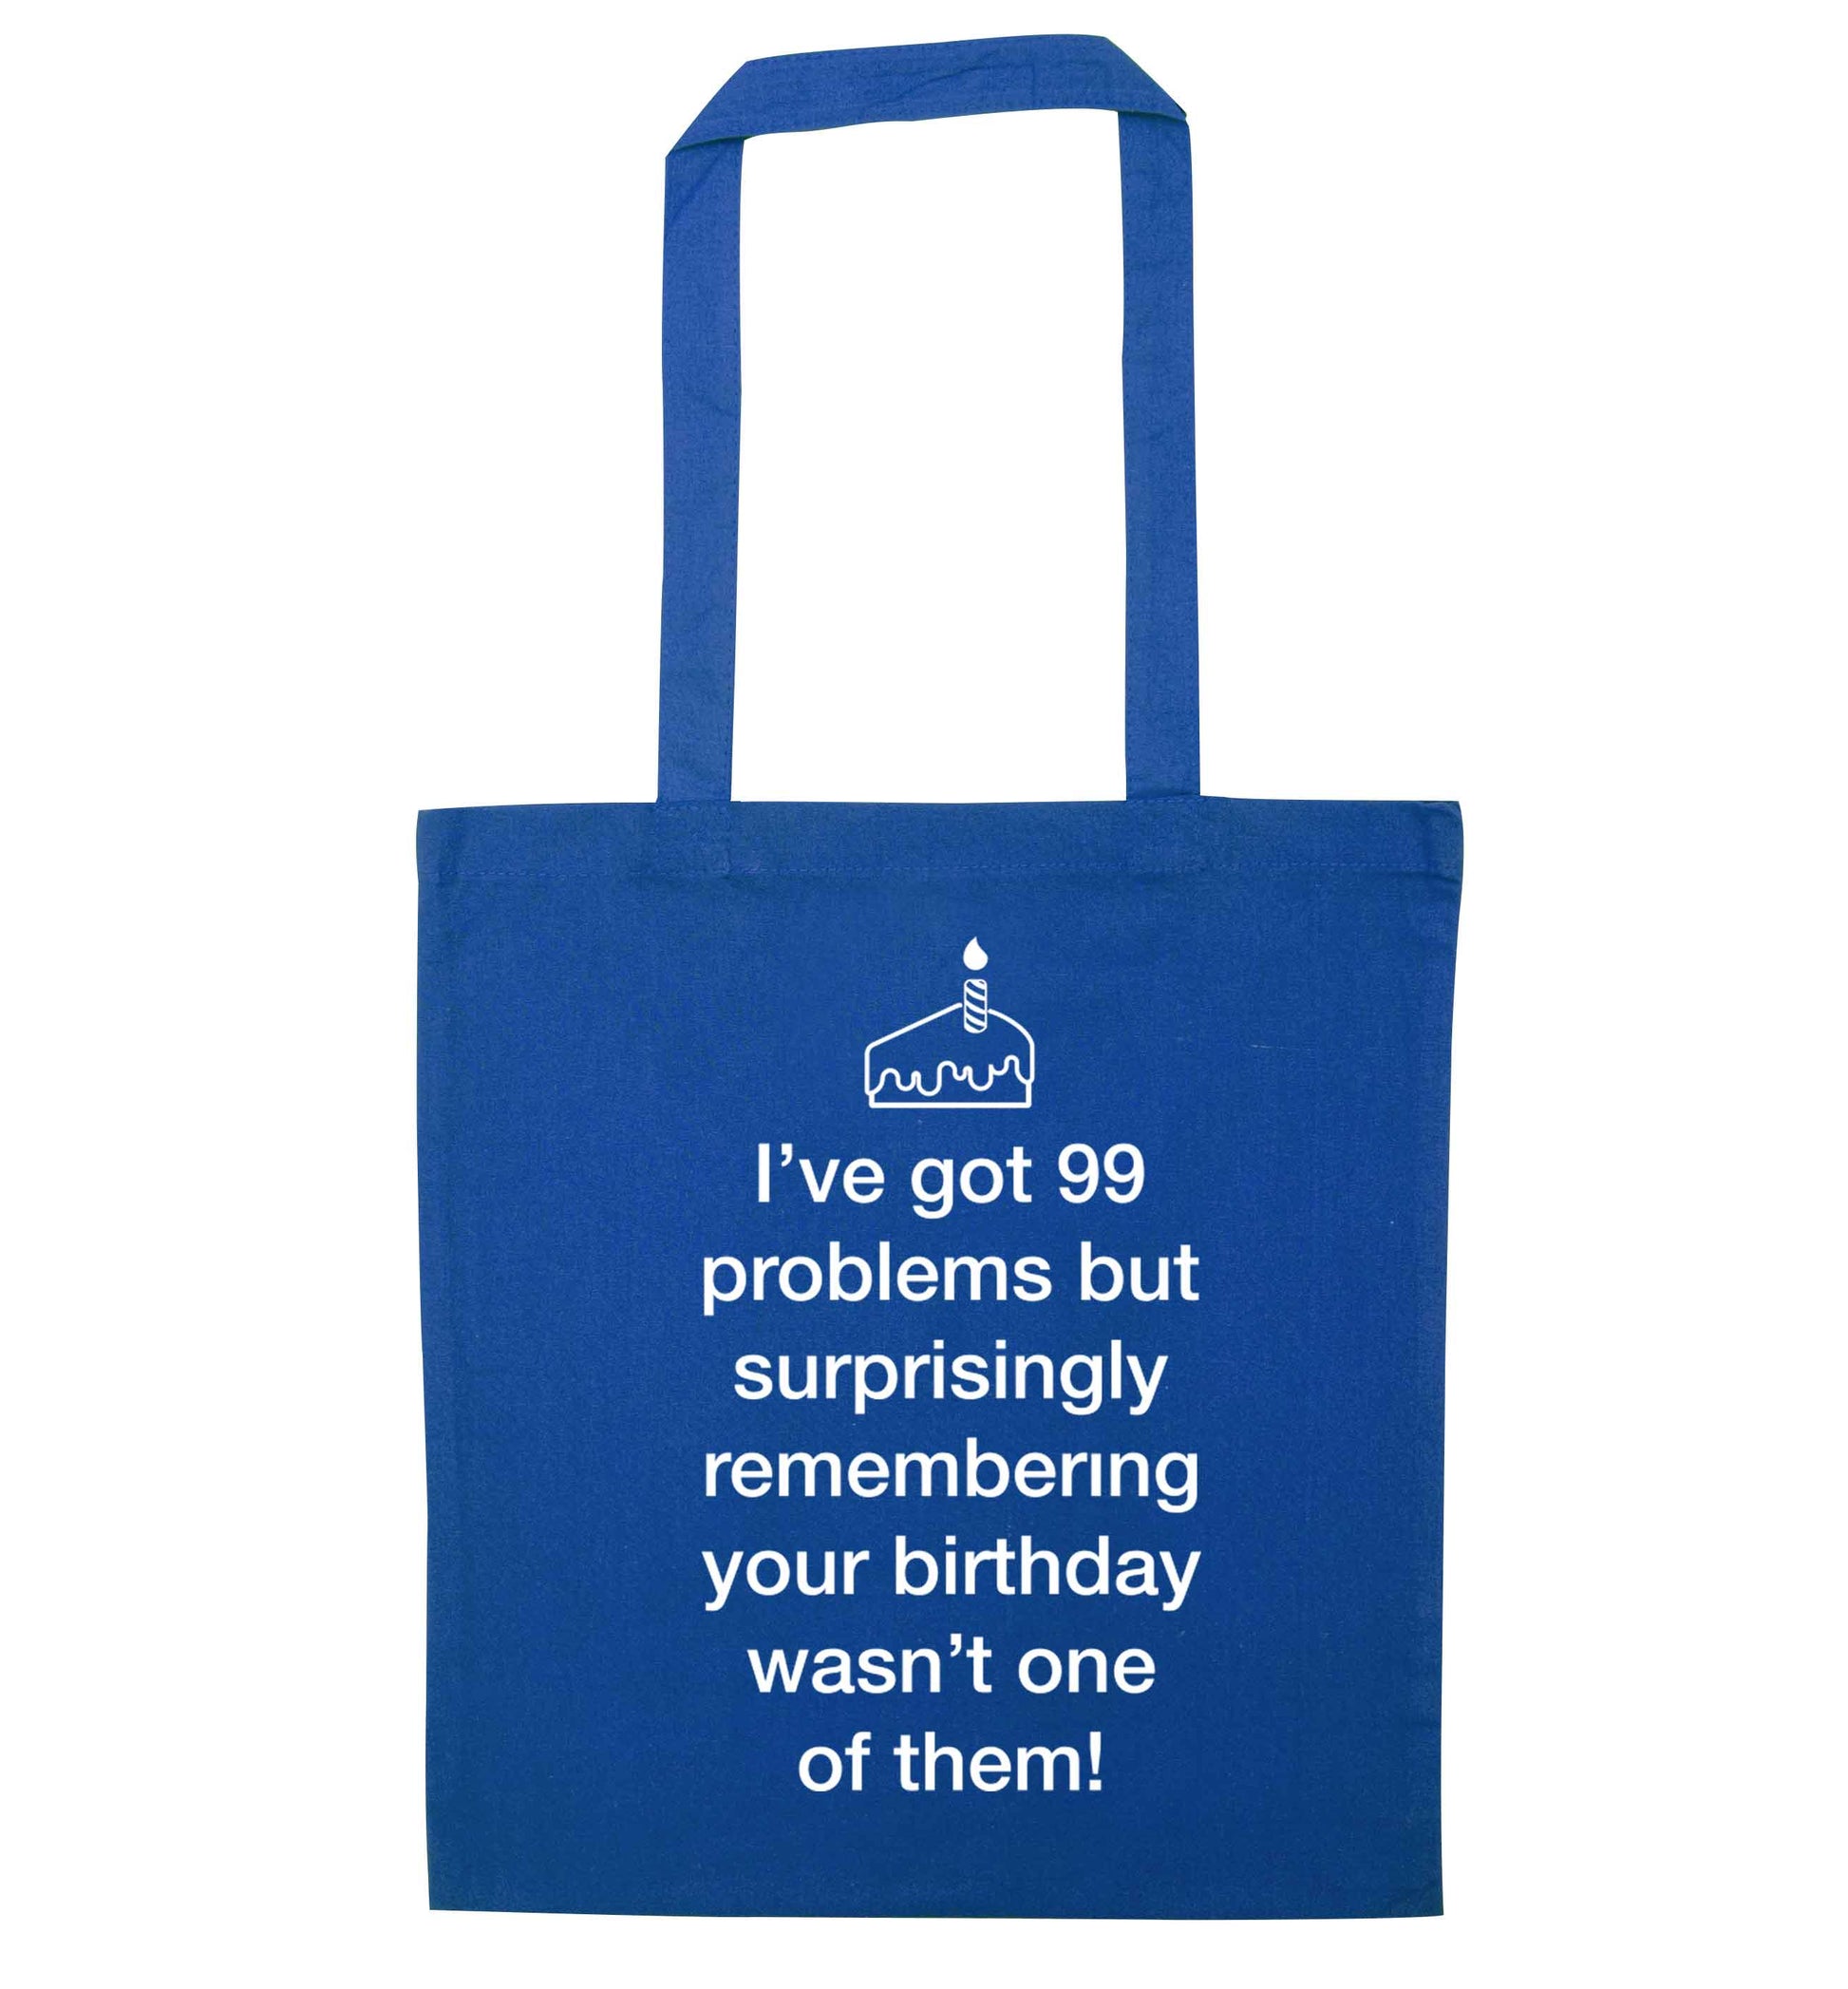 I've got 99 problems but surprisingly remembering your birthday wasn't one of them! blue tote bag